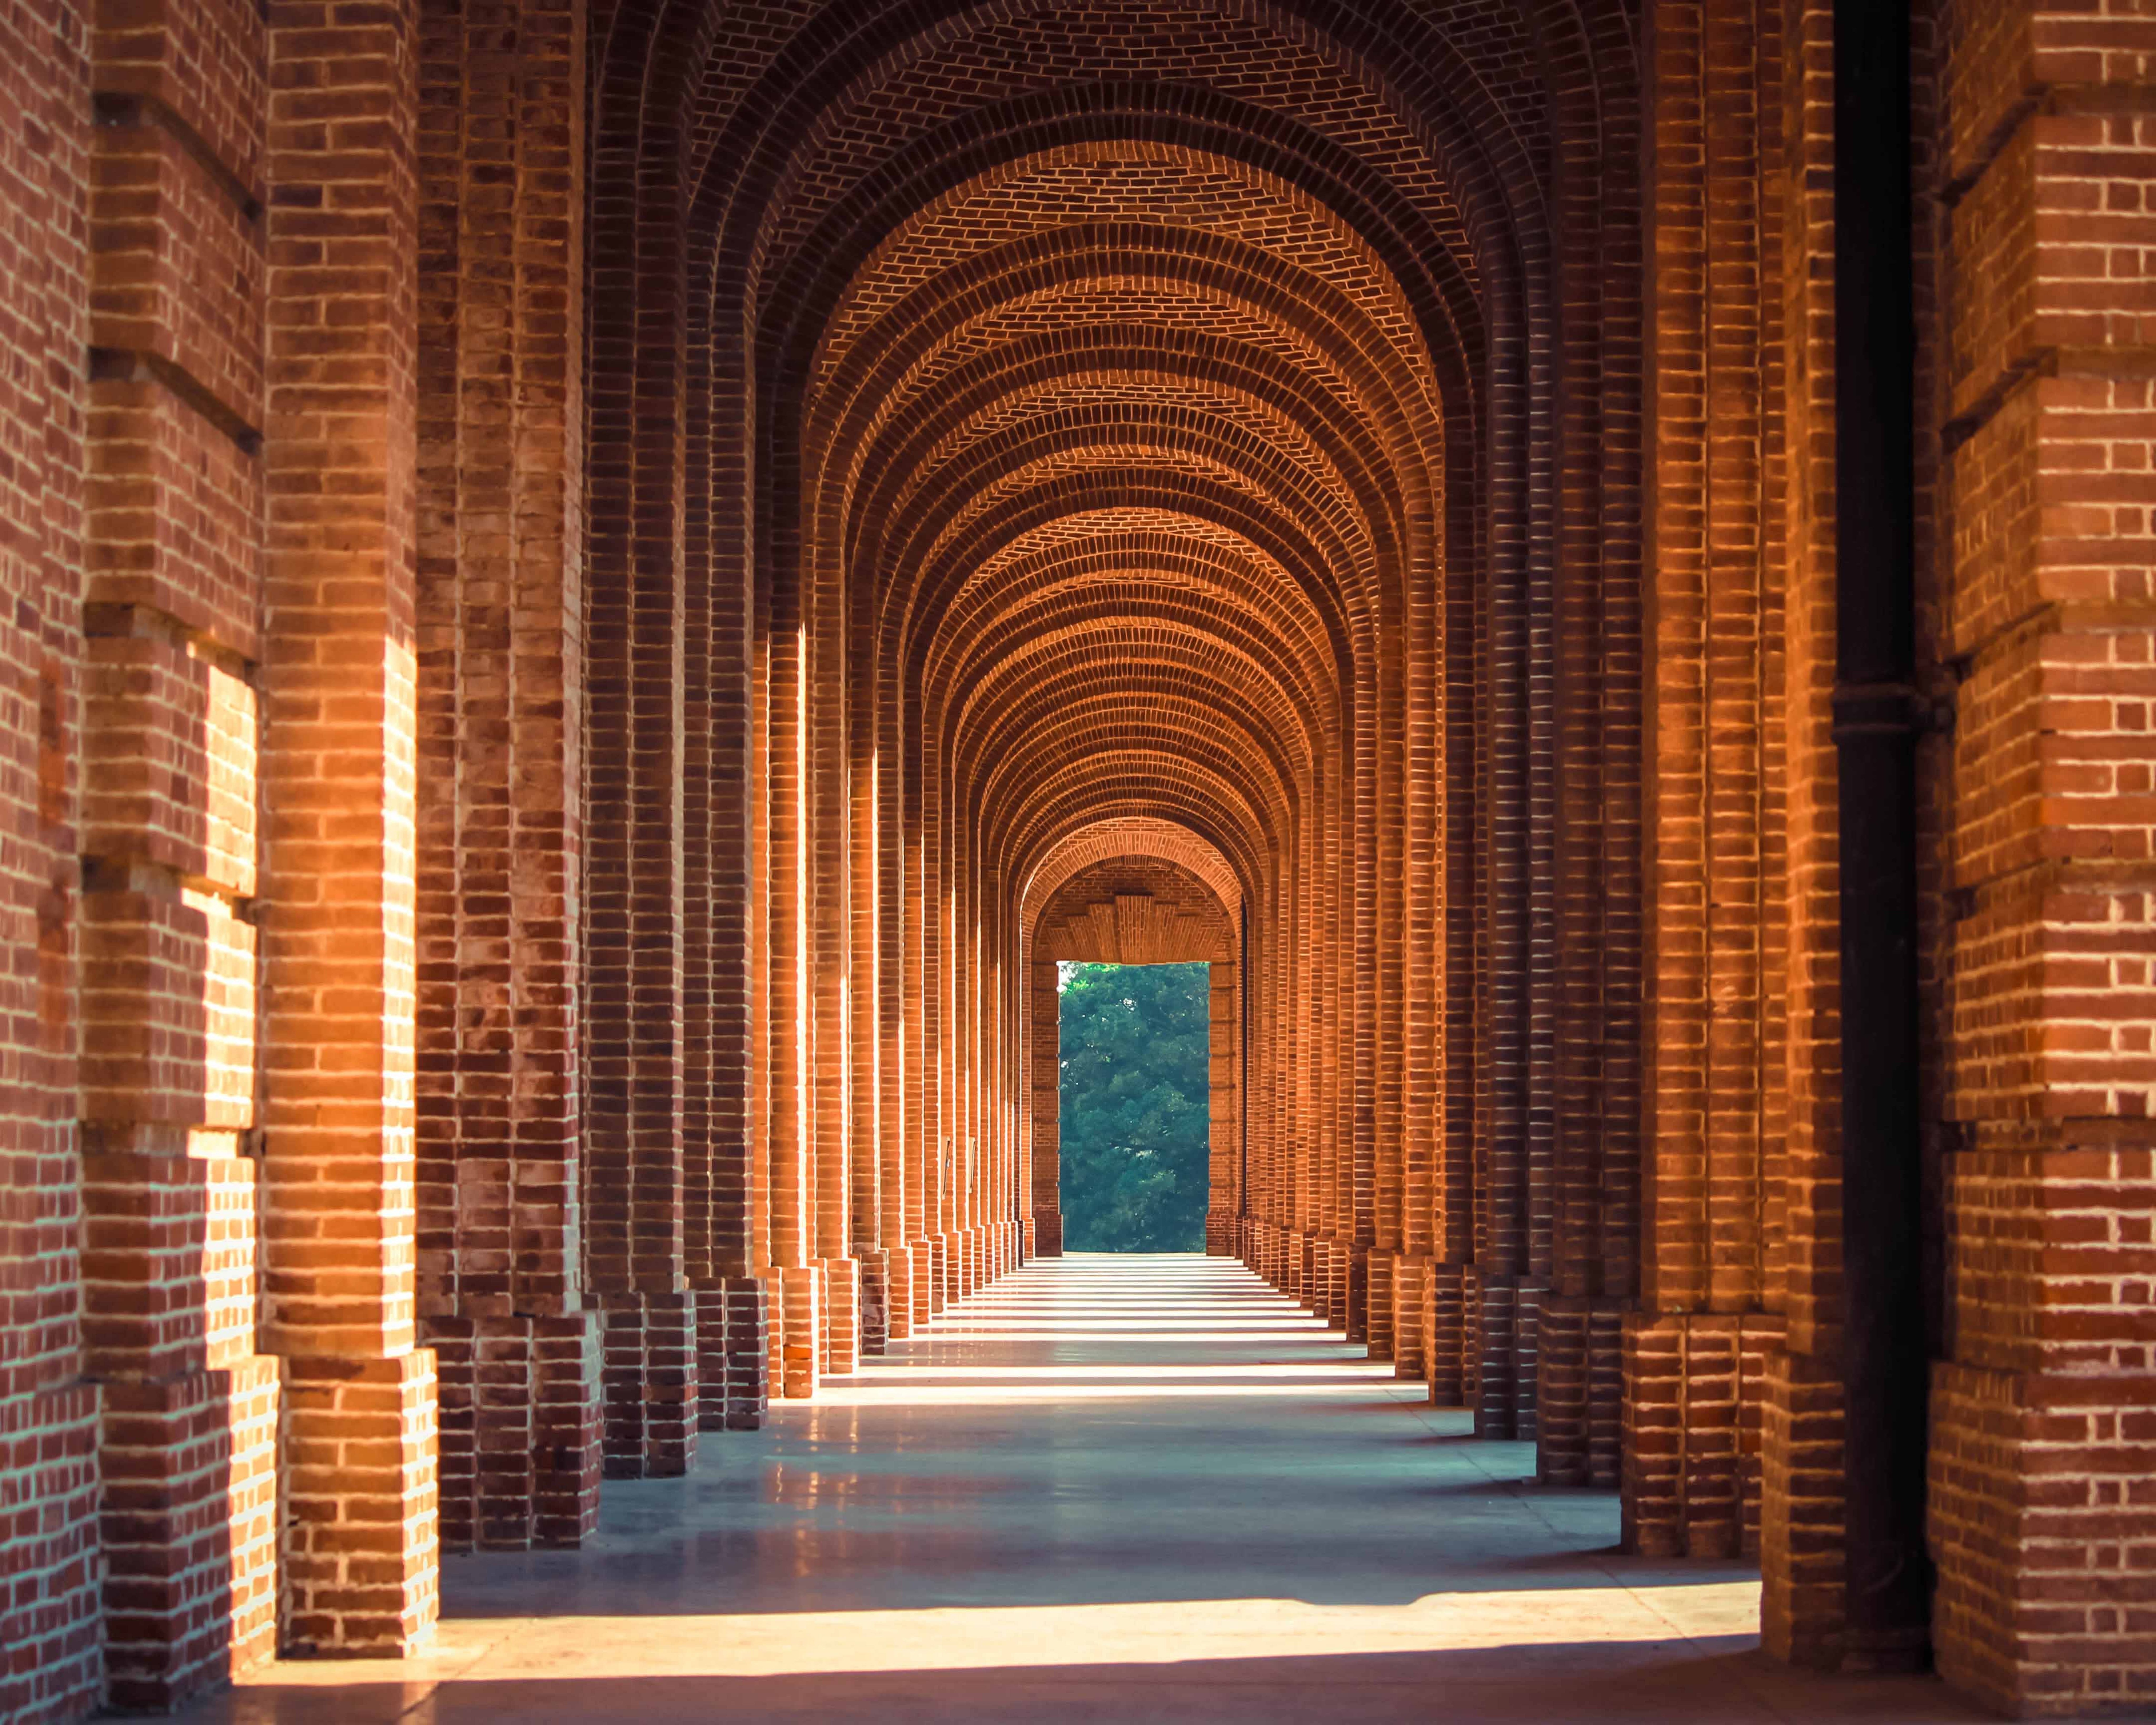 A corridor with a series of brick arches | Free Paths | Pinterest ...